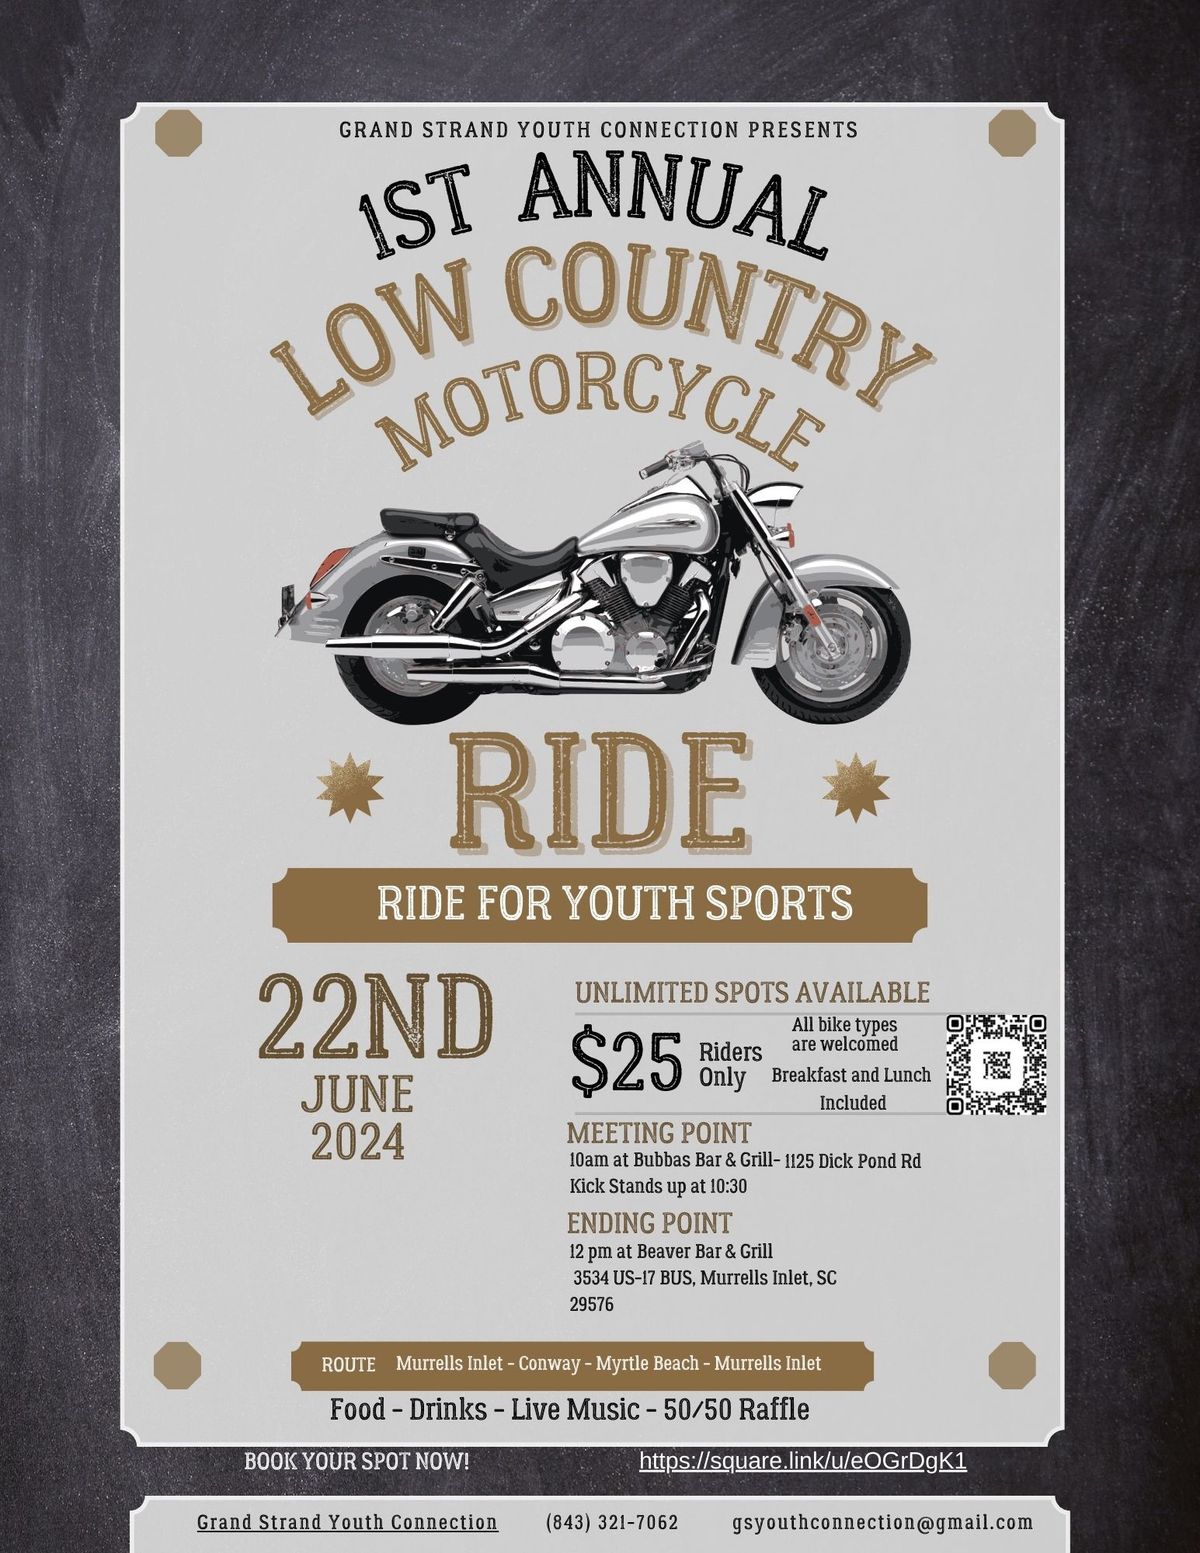 1st Annual Low County Motorcycle - Ride for a Cause